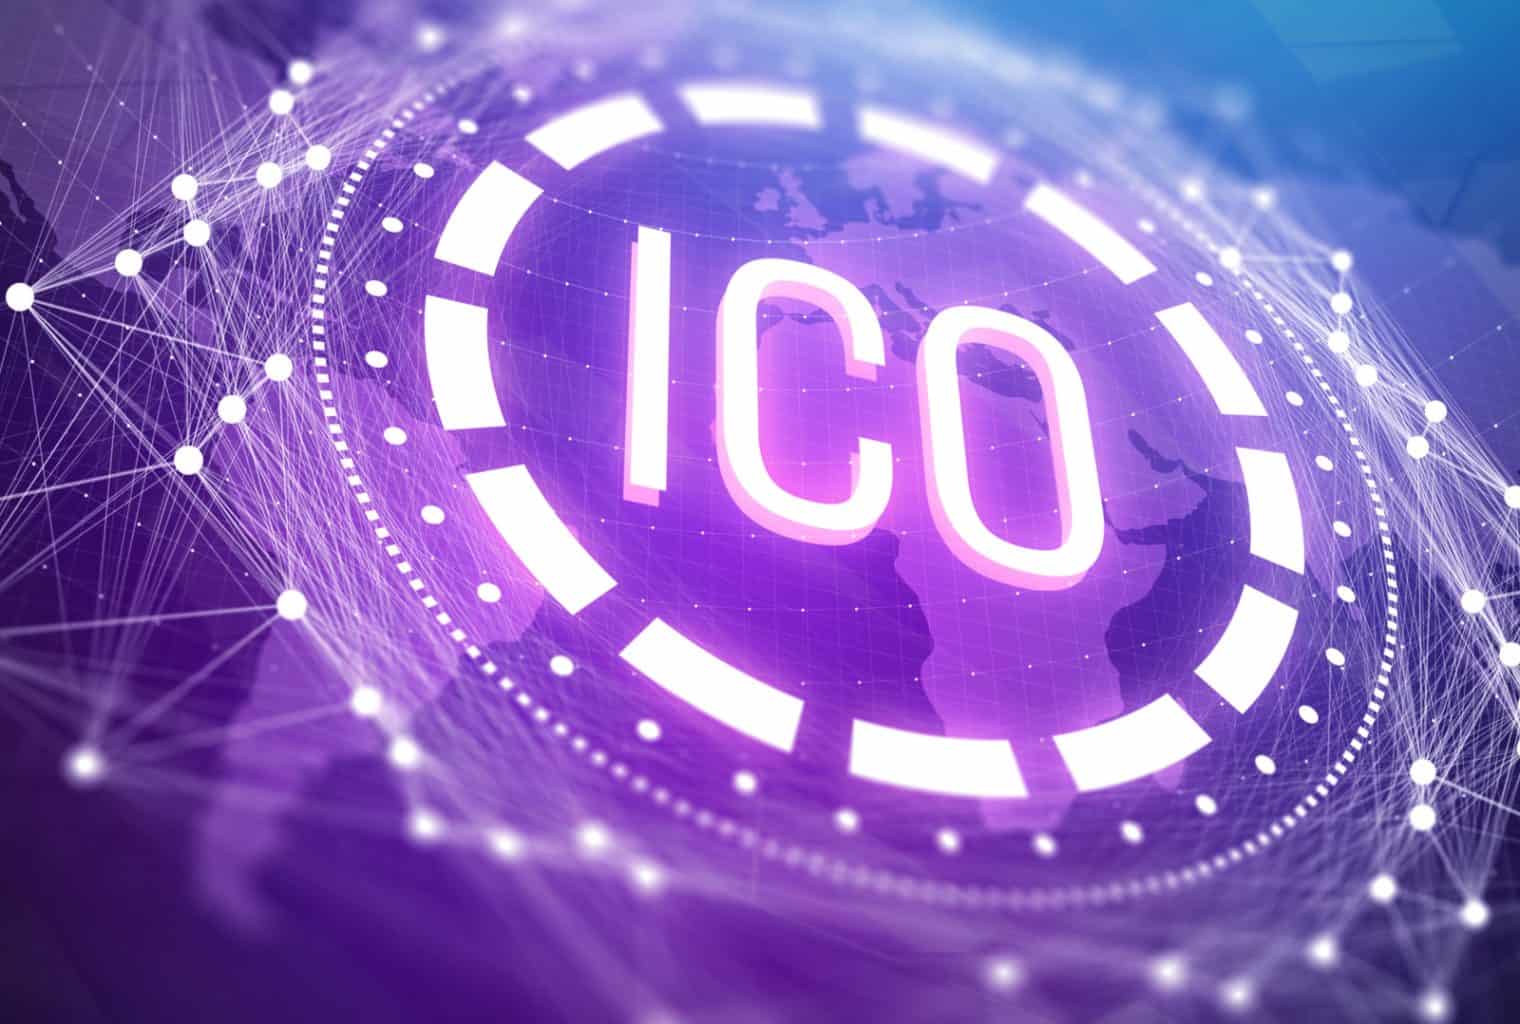 ICO Initial Coin Offering